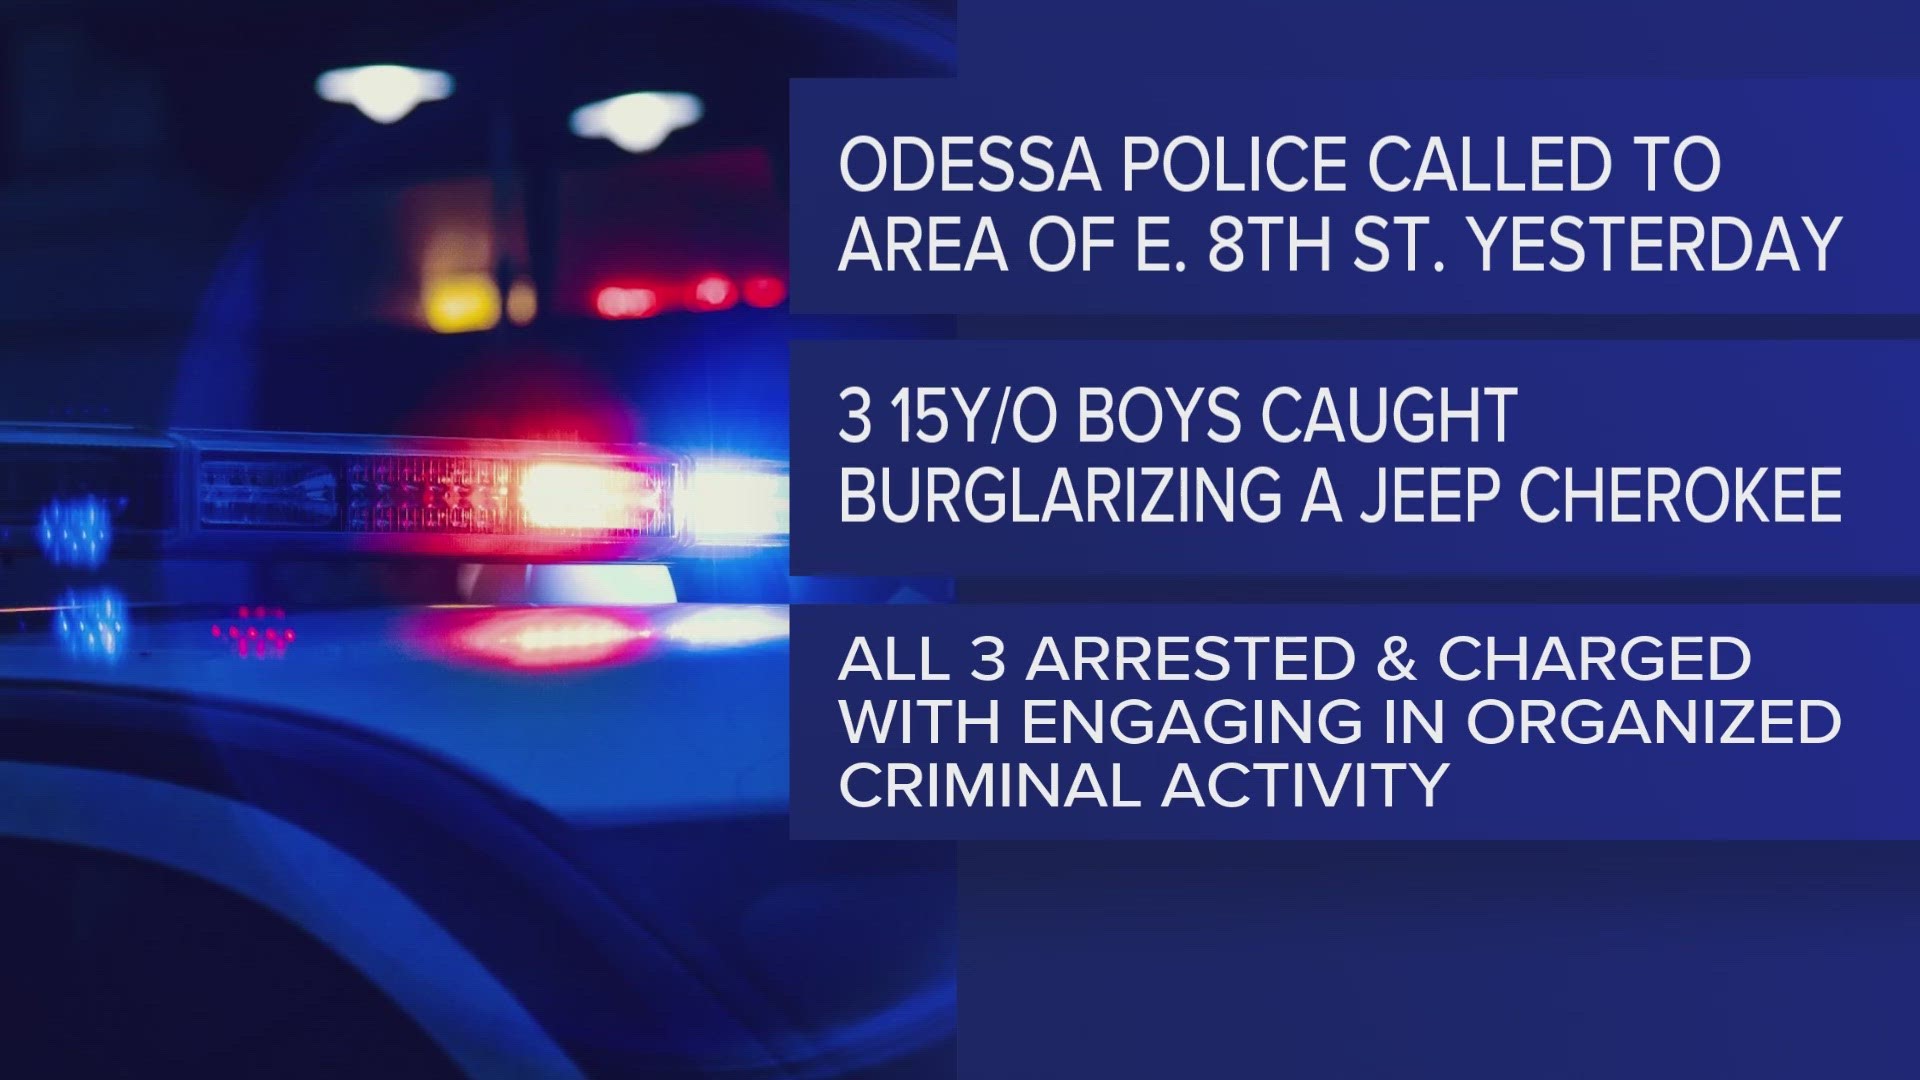 All three 15-year-olds were charged with engaging in organized criminal activity.